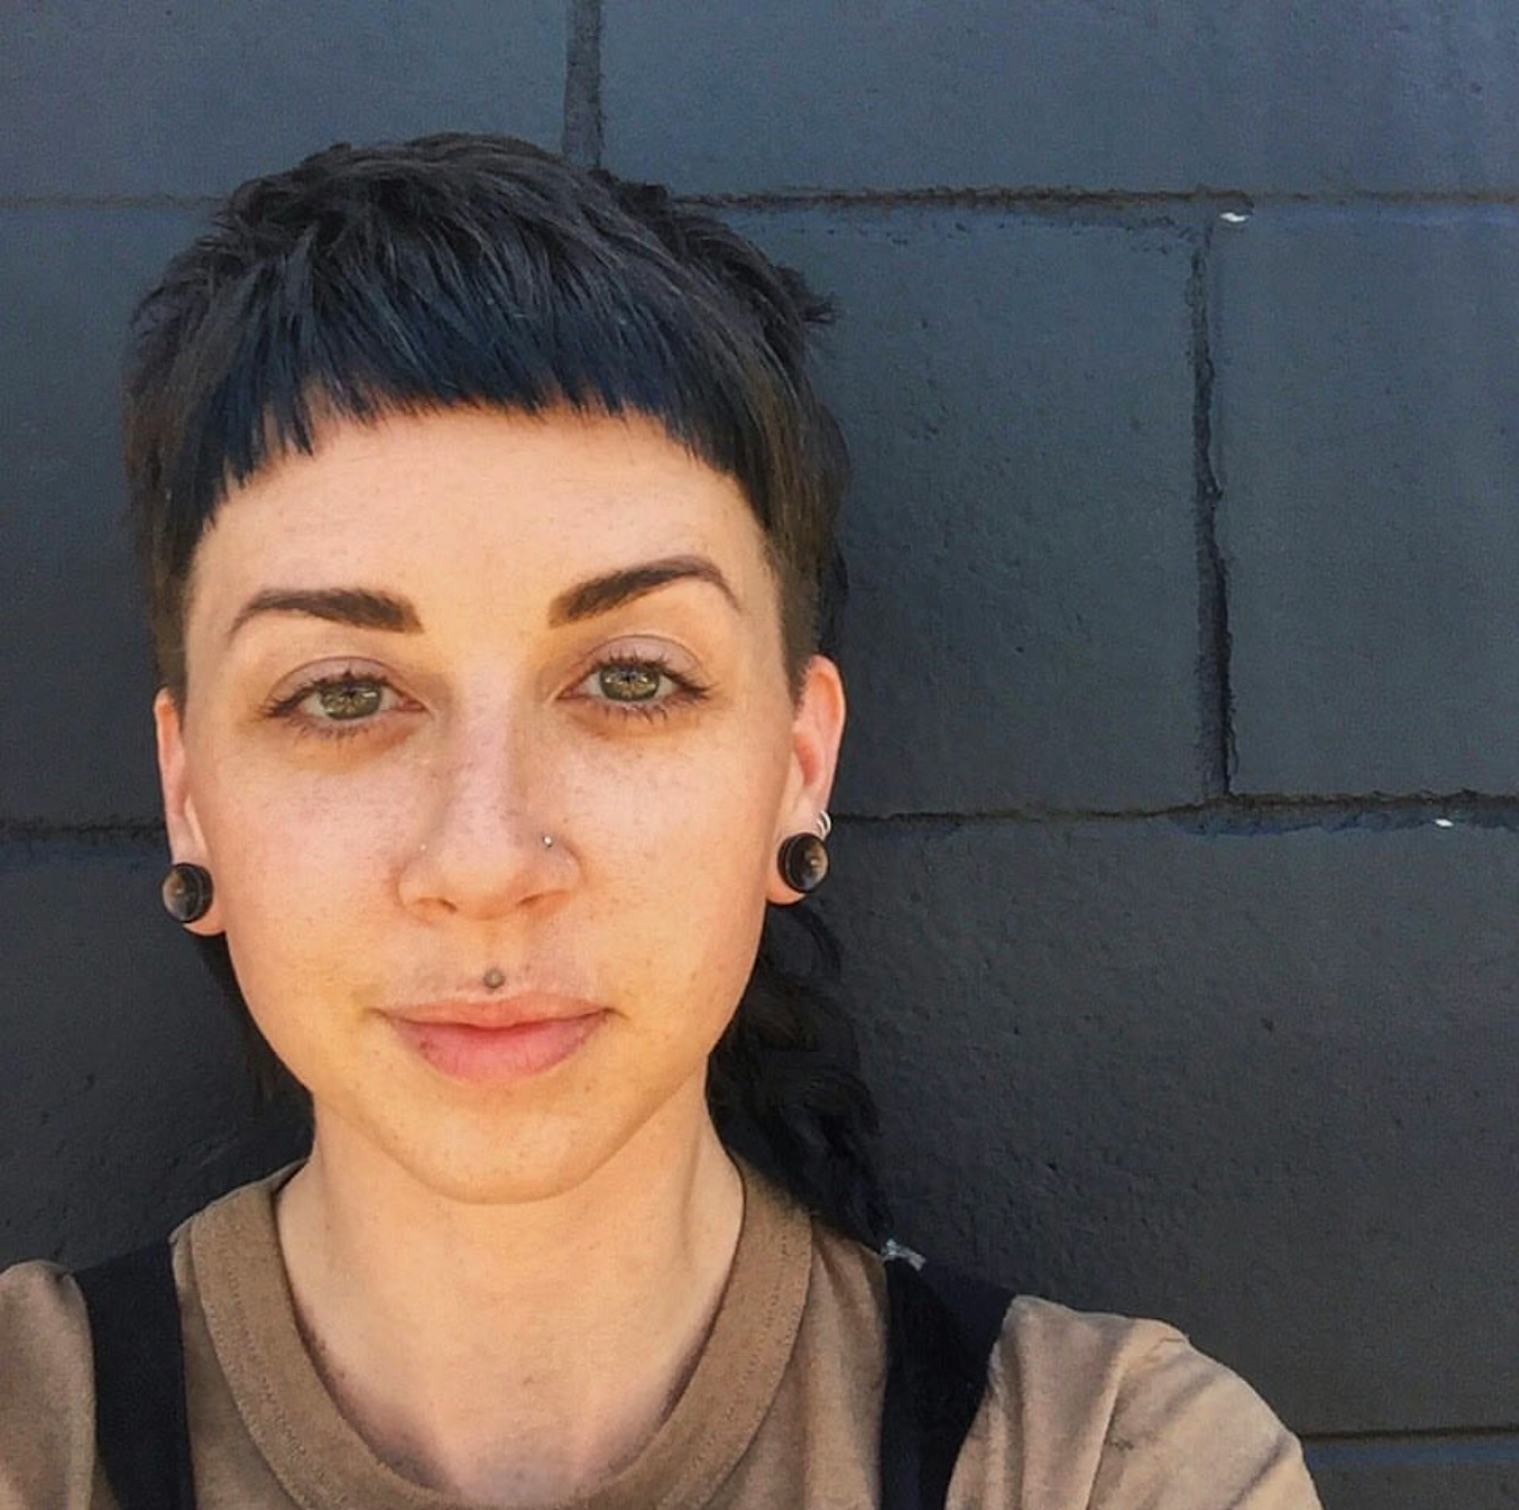 7 Queer Folks On Their Haircuts And Why They Mean So Damn Much